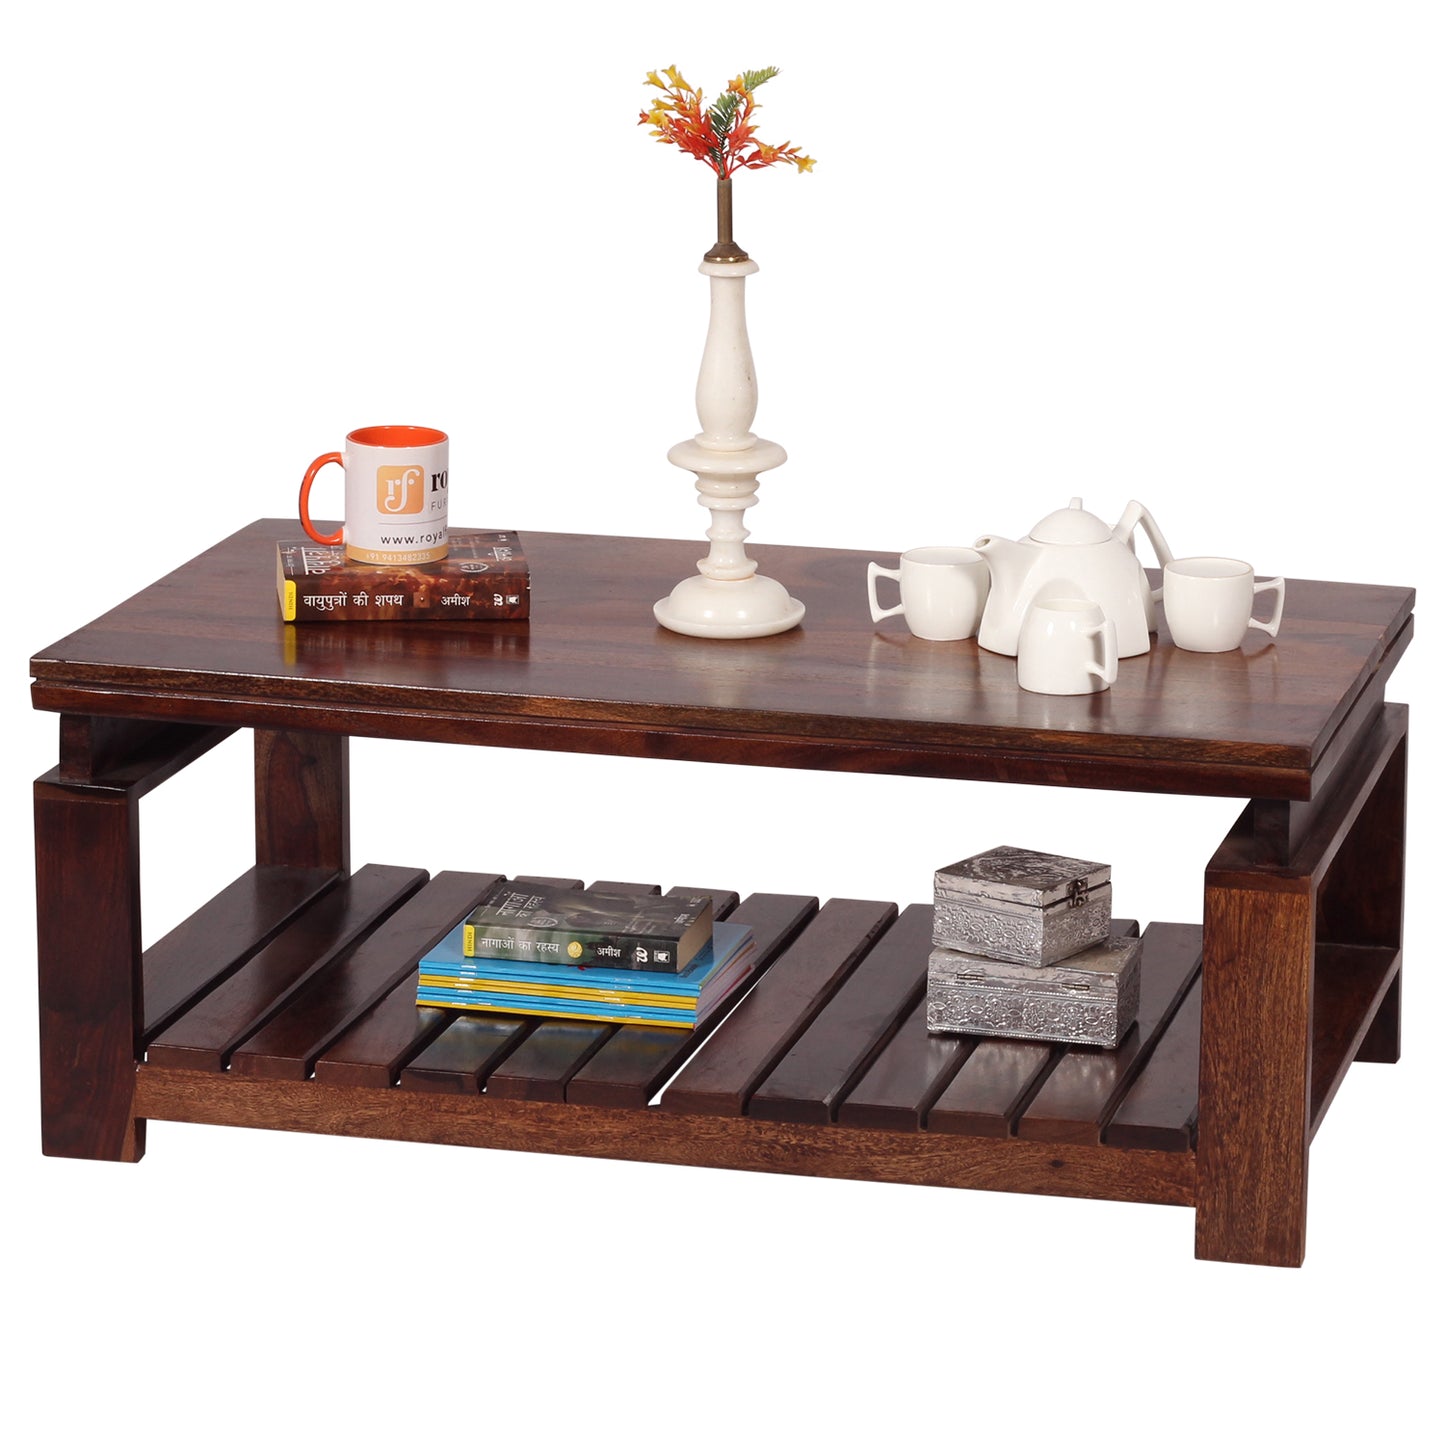 MoonWooden Engineered Wood Coffee Table/Center Table for Living Room (Wenge, Matte Finish)